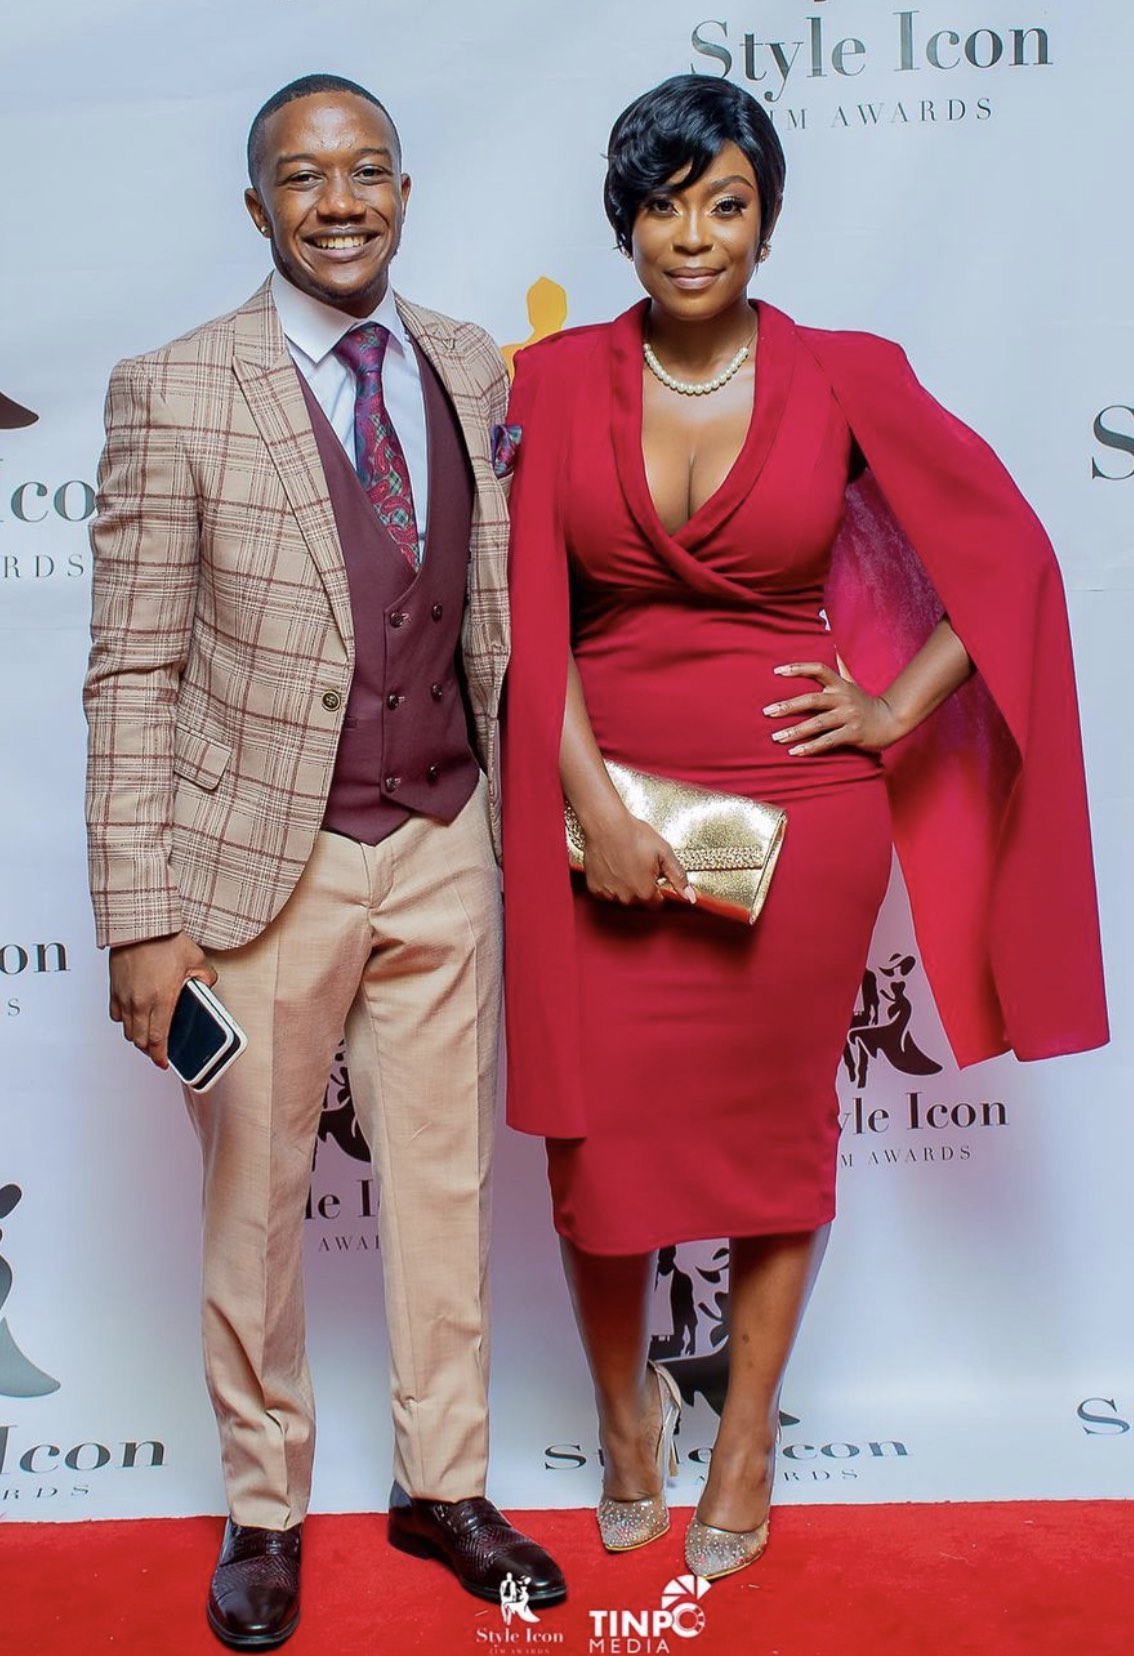 Rumbi RESULTS: STYLE ICON ZIM-AWARDS